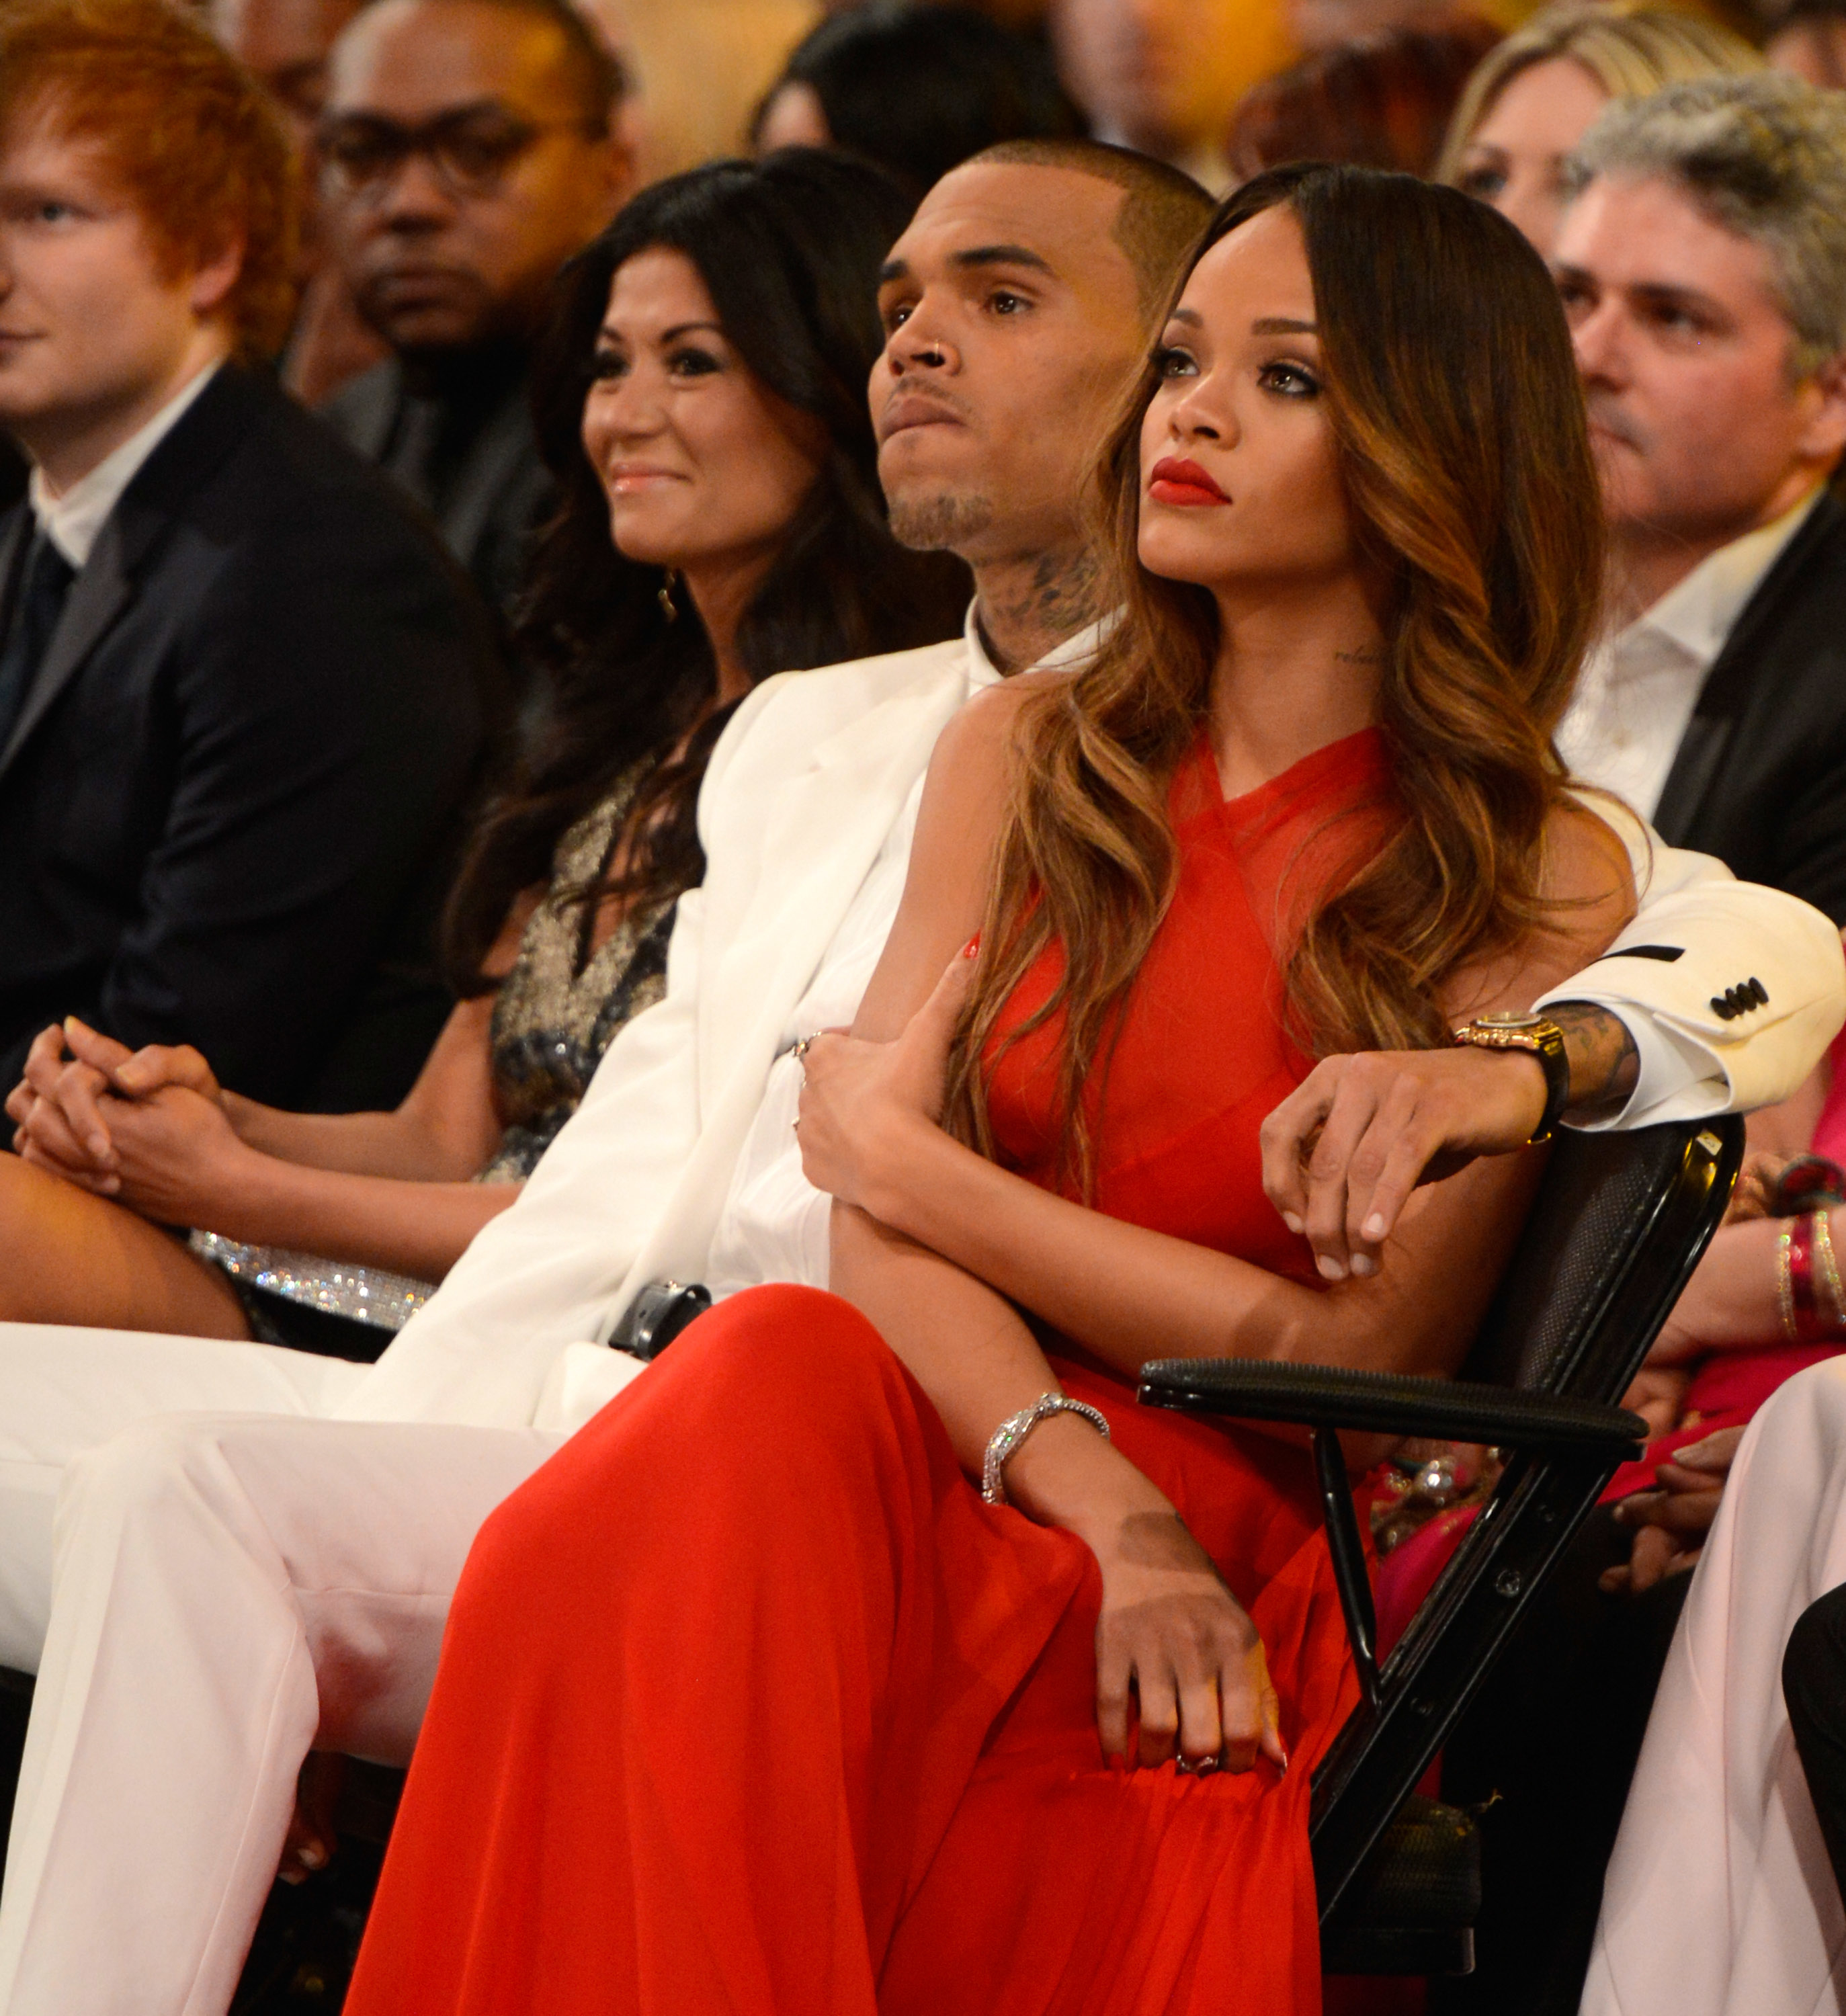 chris brown with his arm around rihanna in the audience